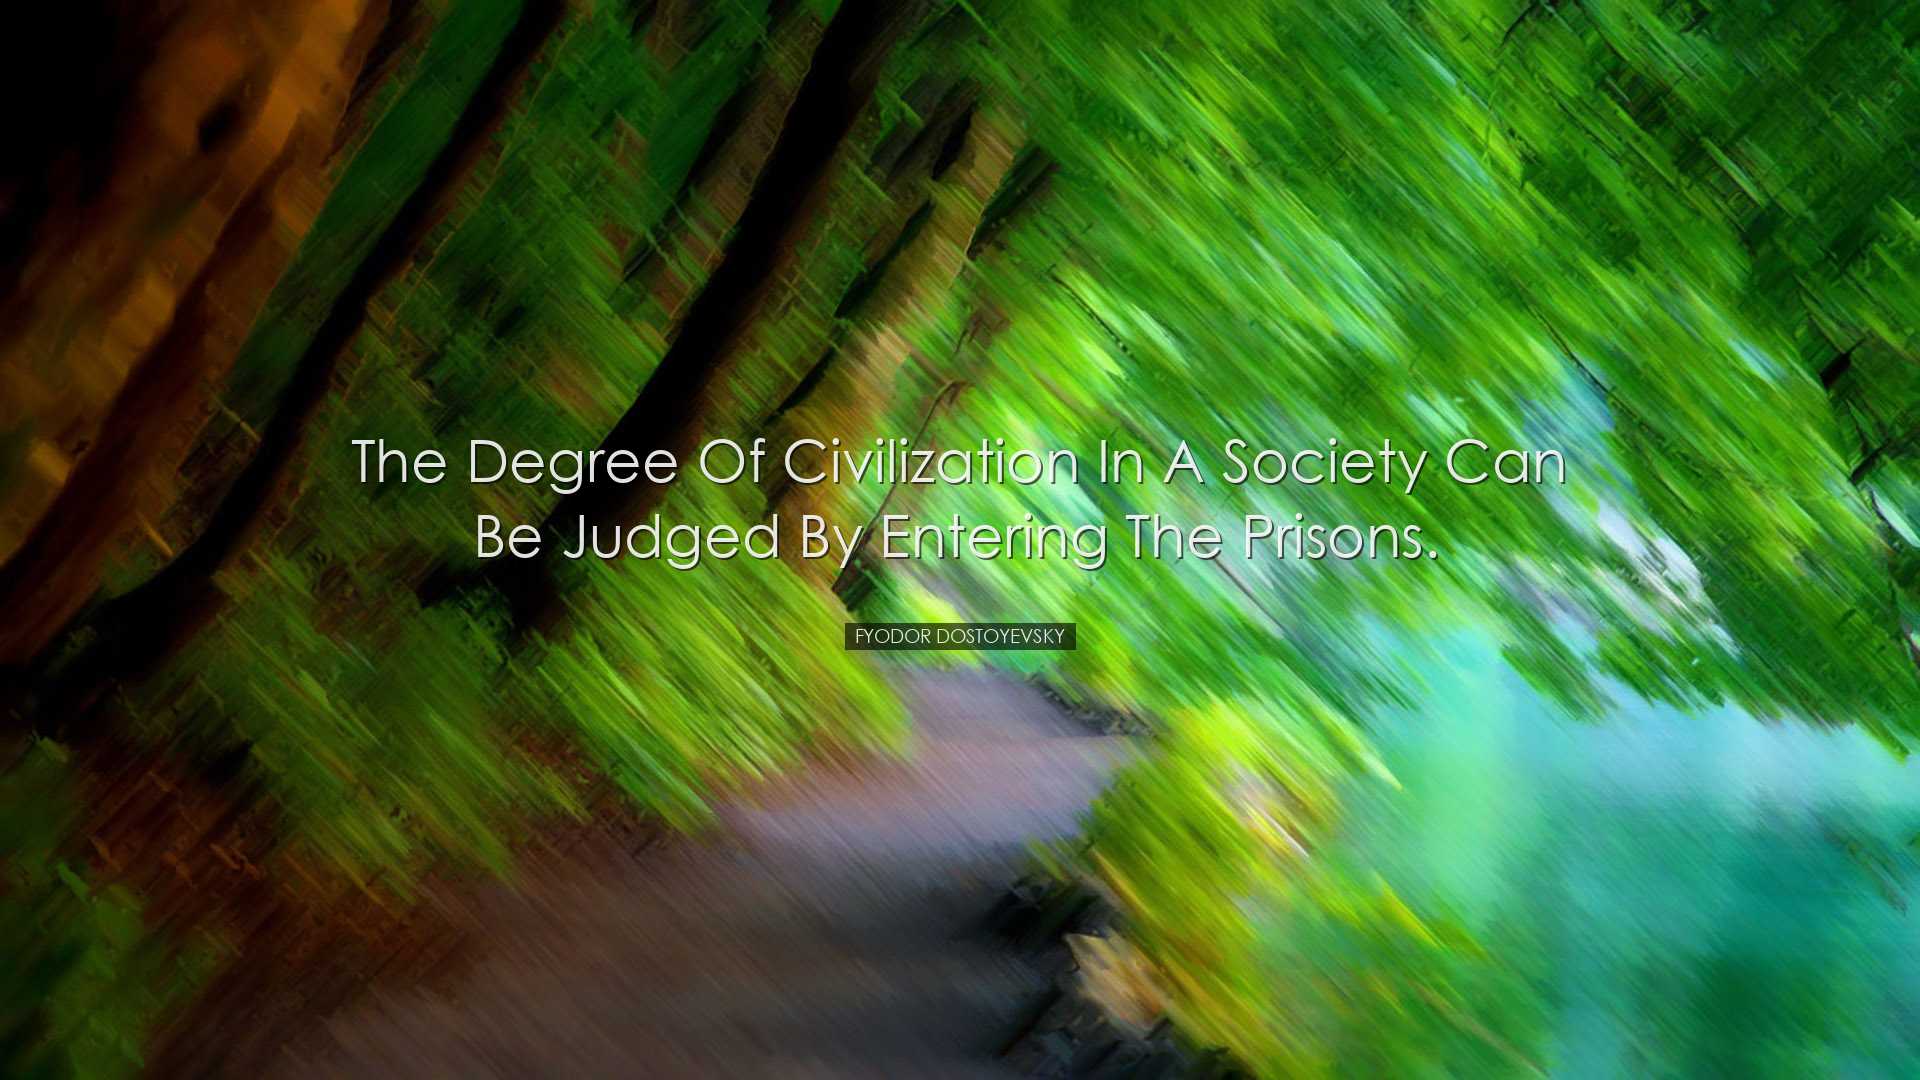 The degree of civilization in a society can be judged by entering